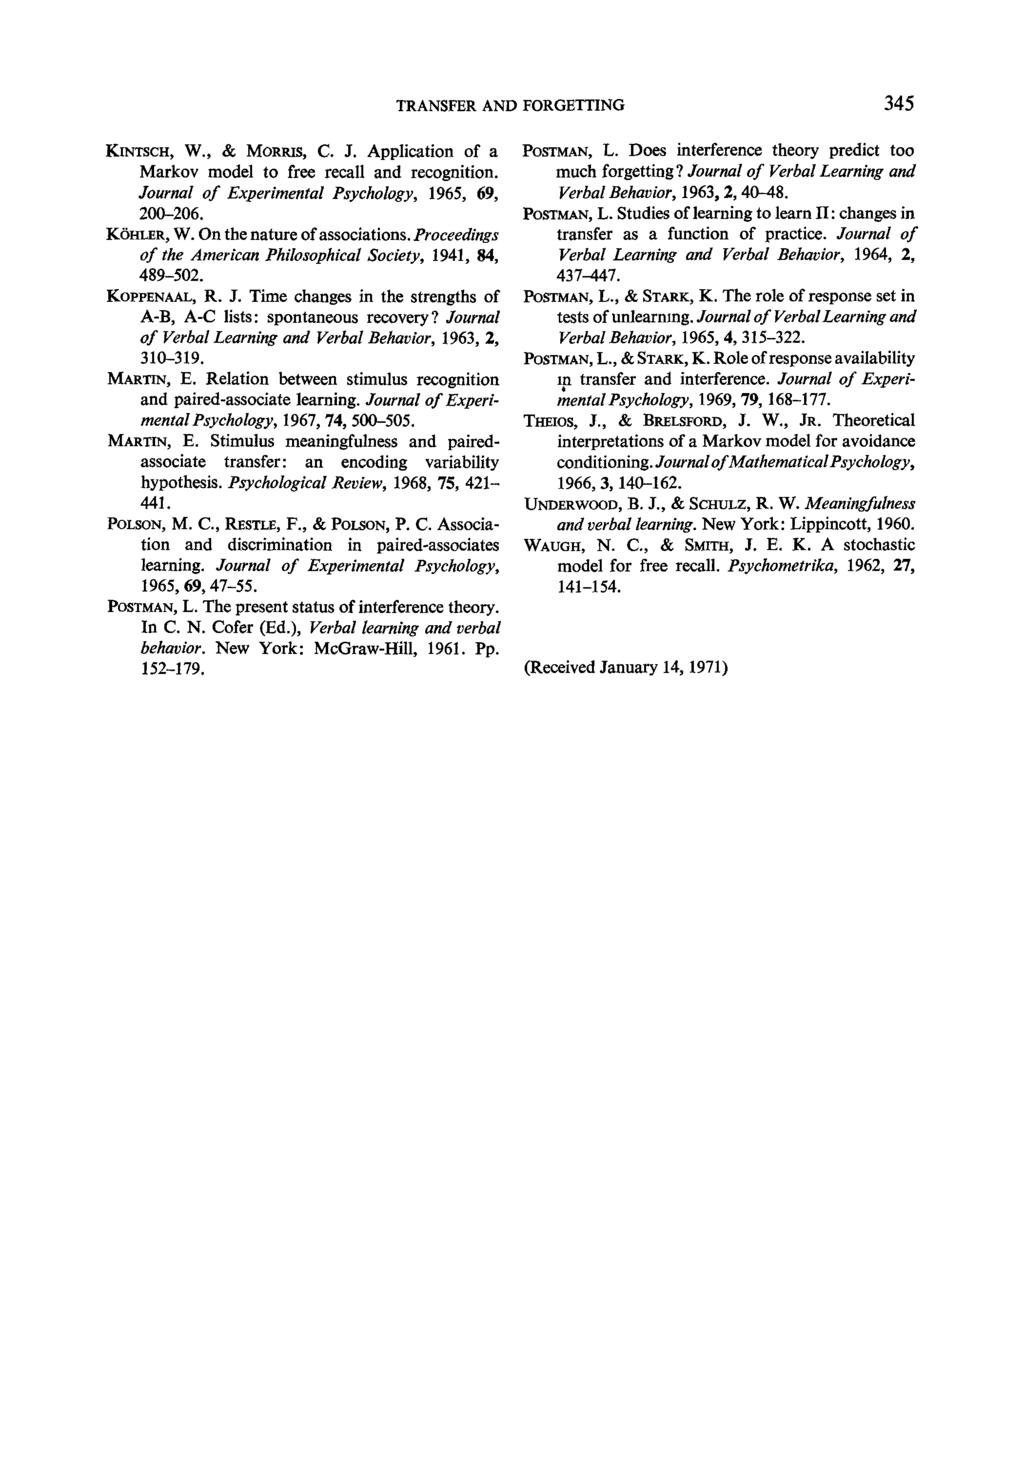 TRANSFER AND FORGETTING 345 KINTSCH, W., & MORRIS, C. J. Application of a Markov model to free recall and recognition. Journal of Experimental Psychology, 1965, 69, 200-206. K6HLER, W.